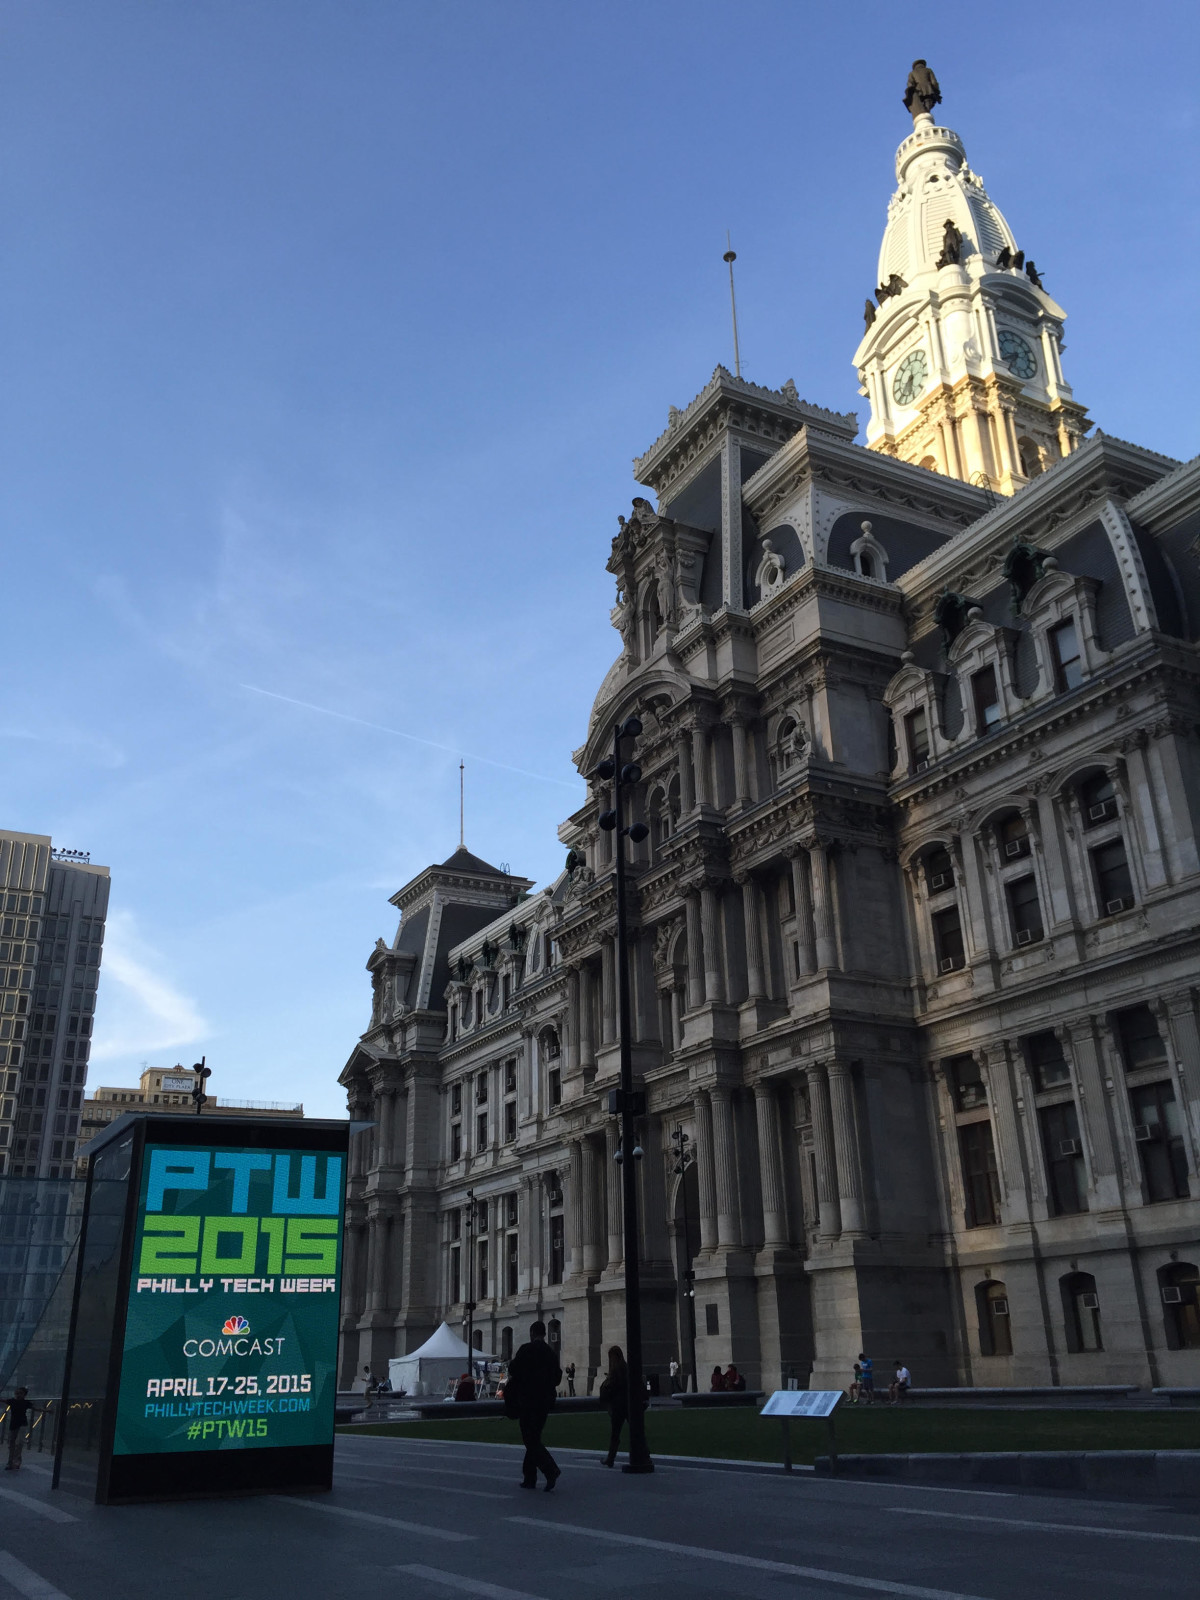 Dilworth Park, the venue for the Philly Tech Week 2015 kickoff event.